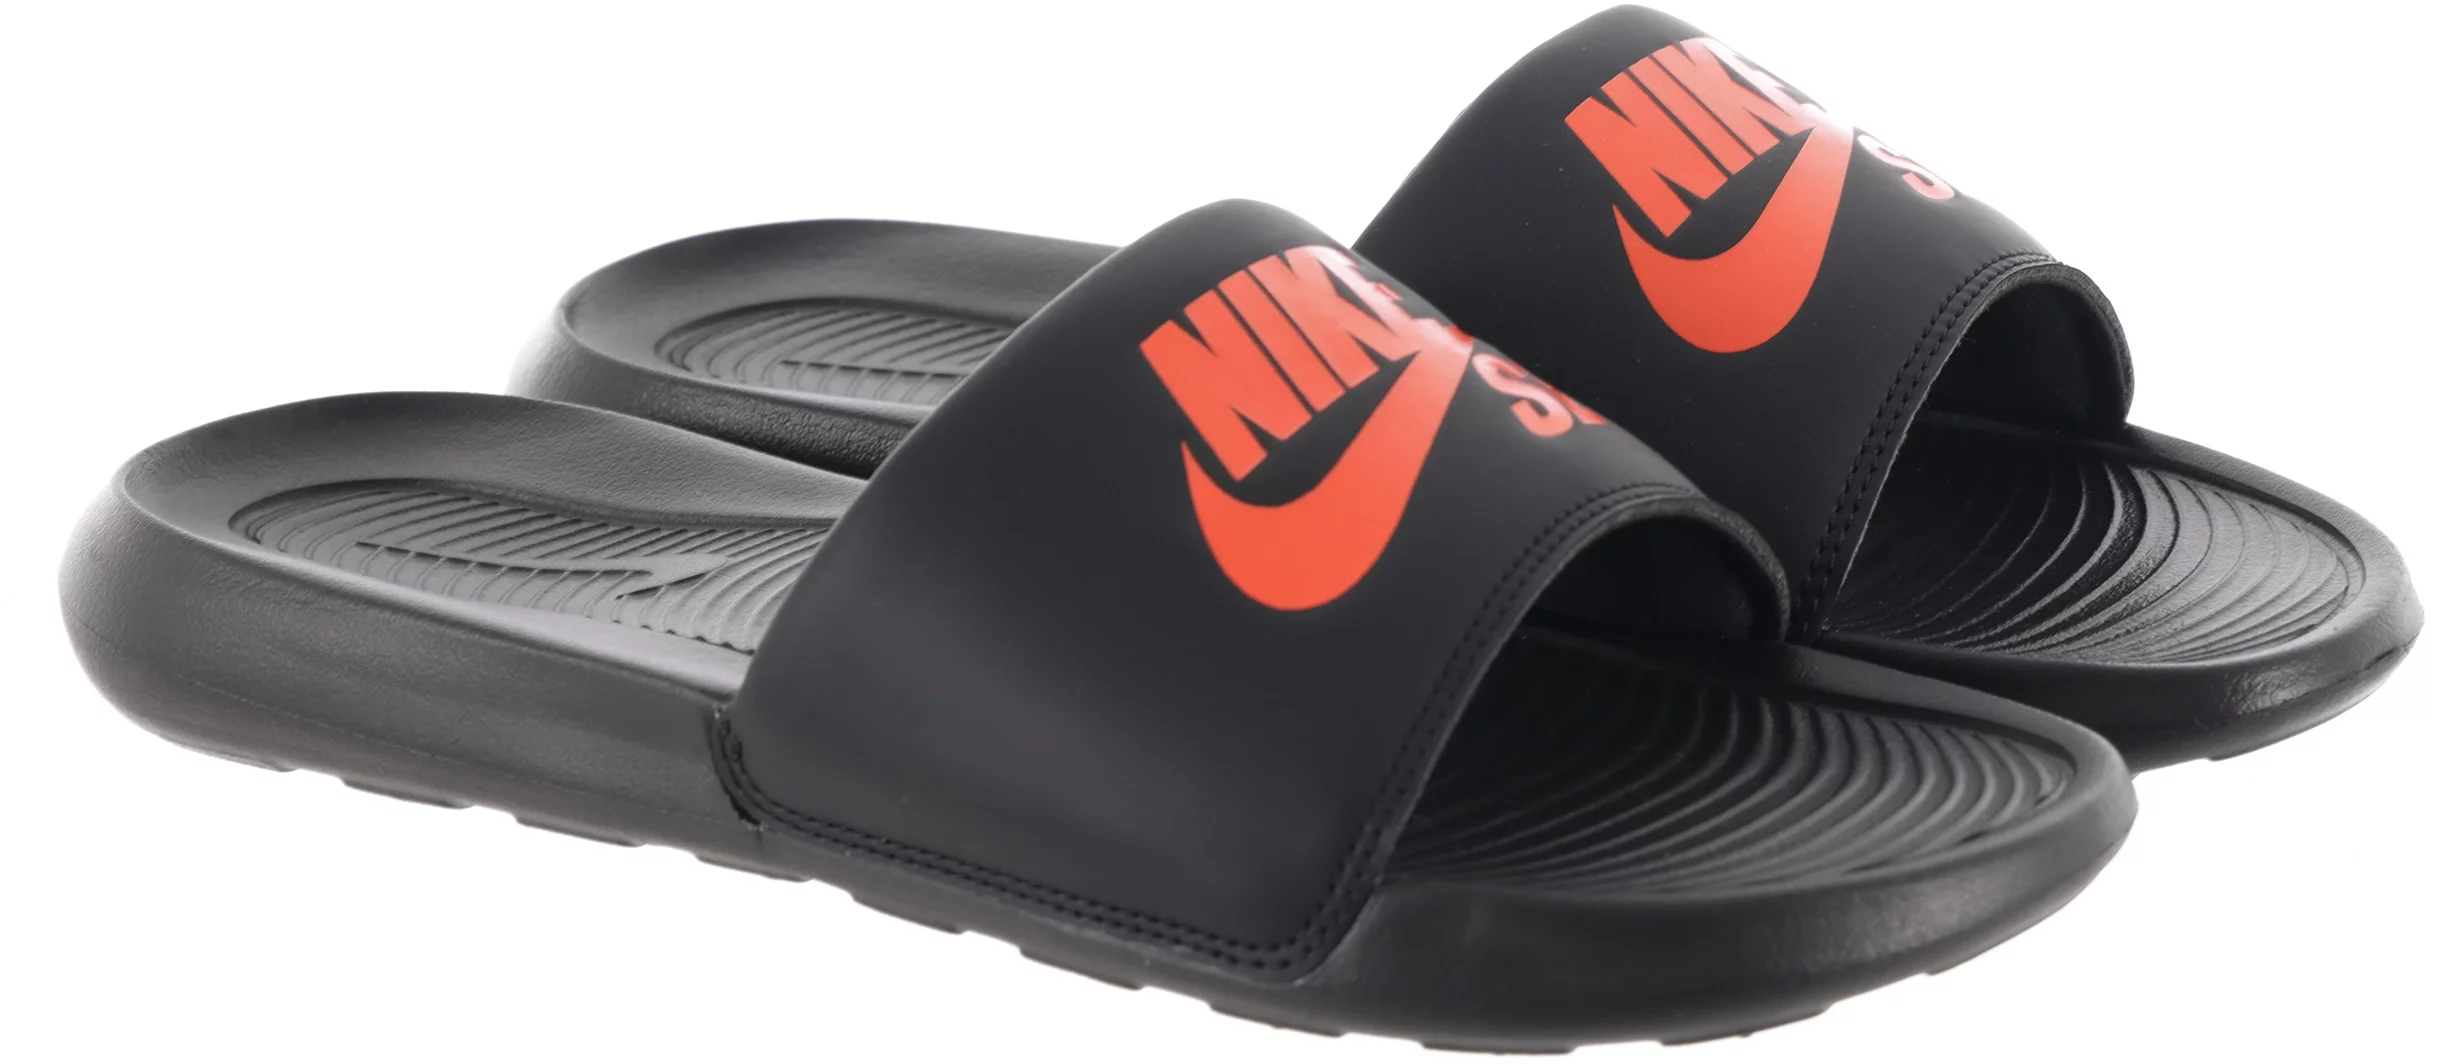 Nike Victori One slides in black and red